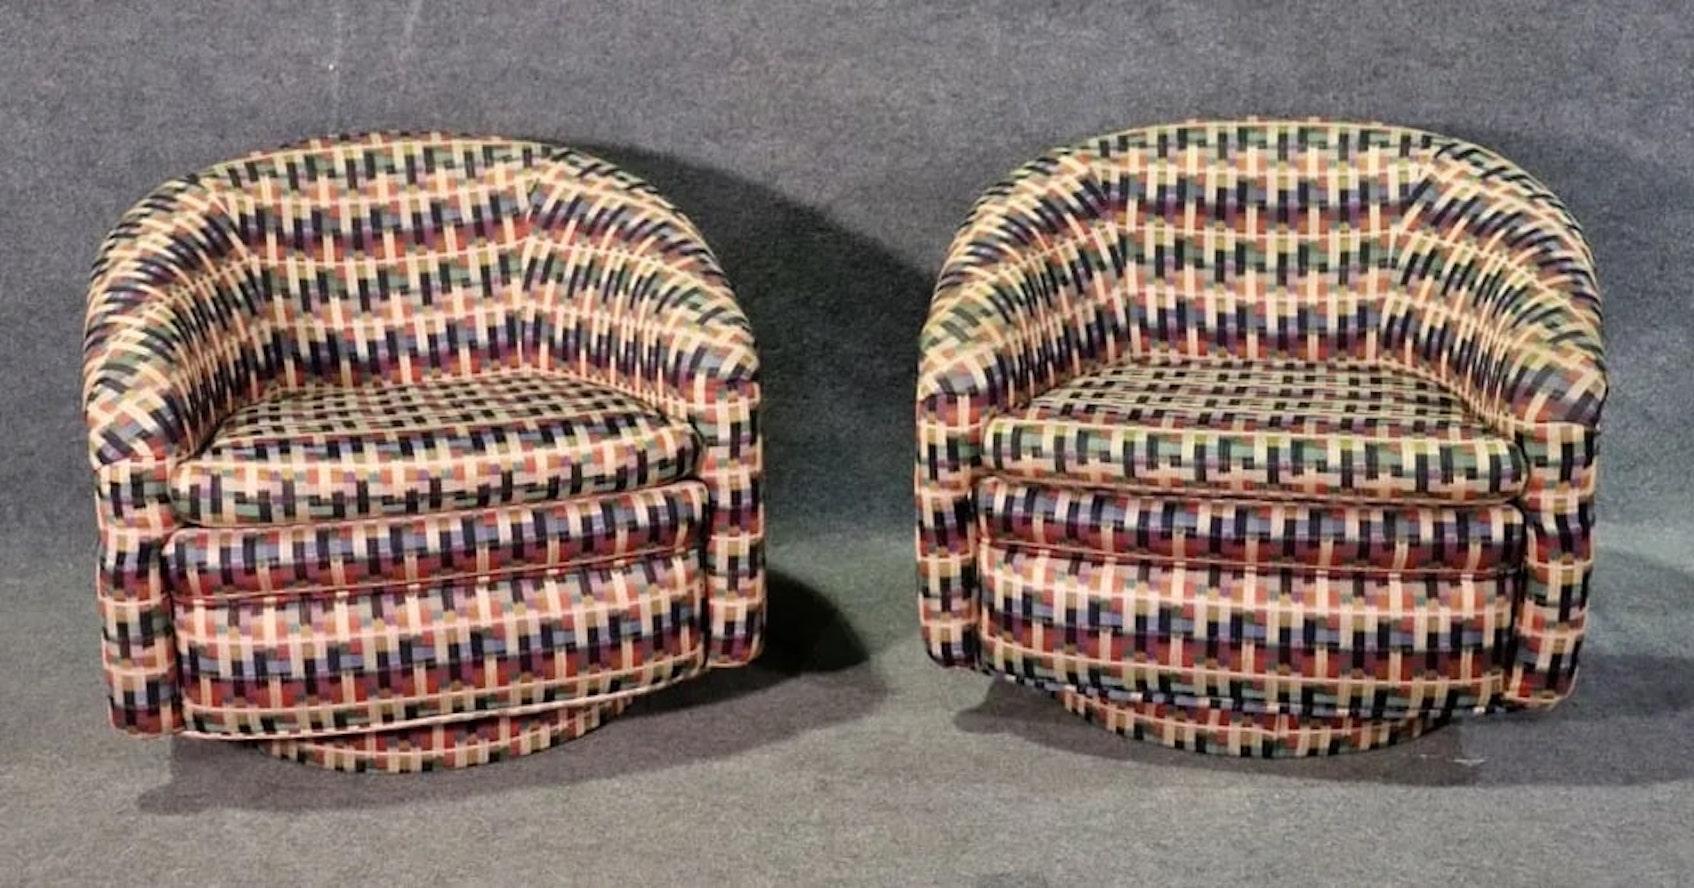 Pair of vintage modern round back chairs on swivel bases. Fun pattern fabric with comfortable barrel back.
Please confirm location NY or NJ